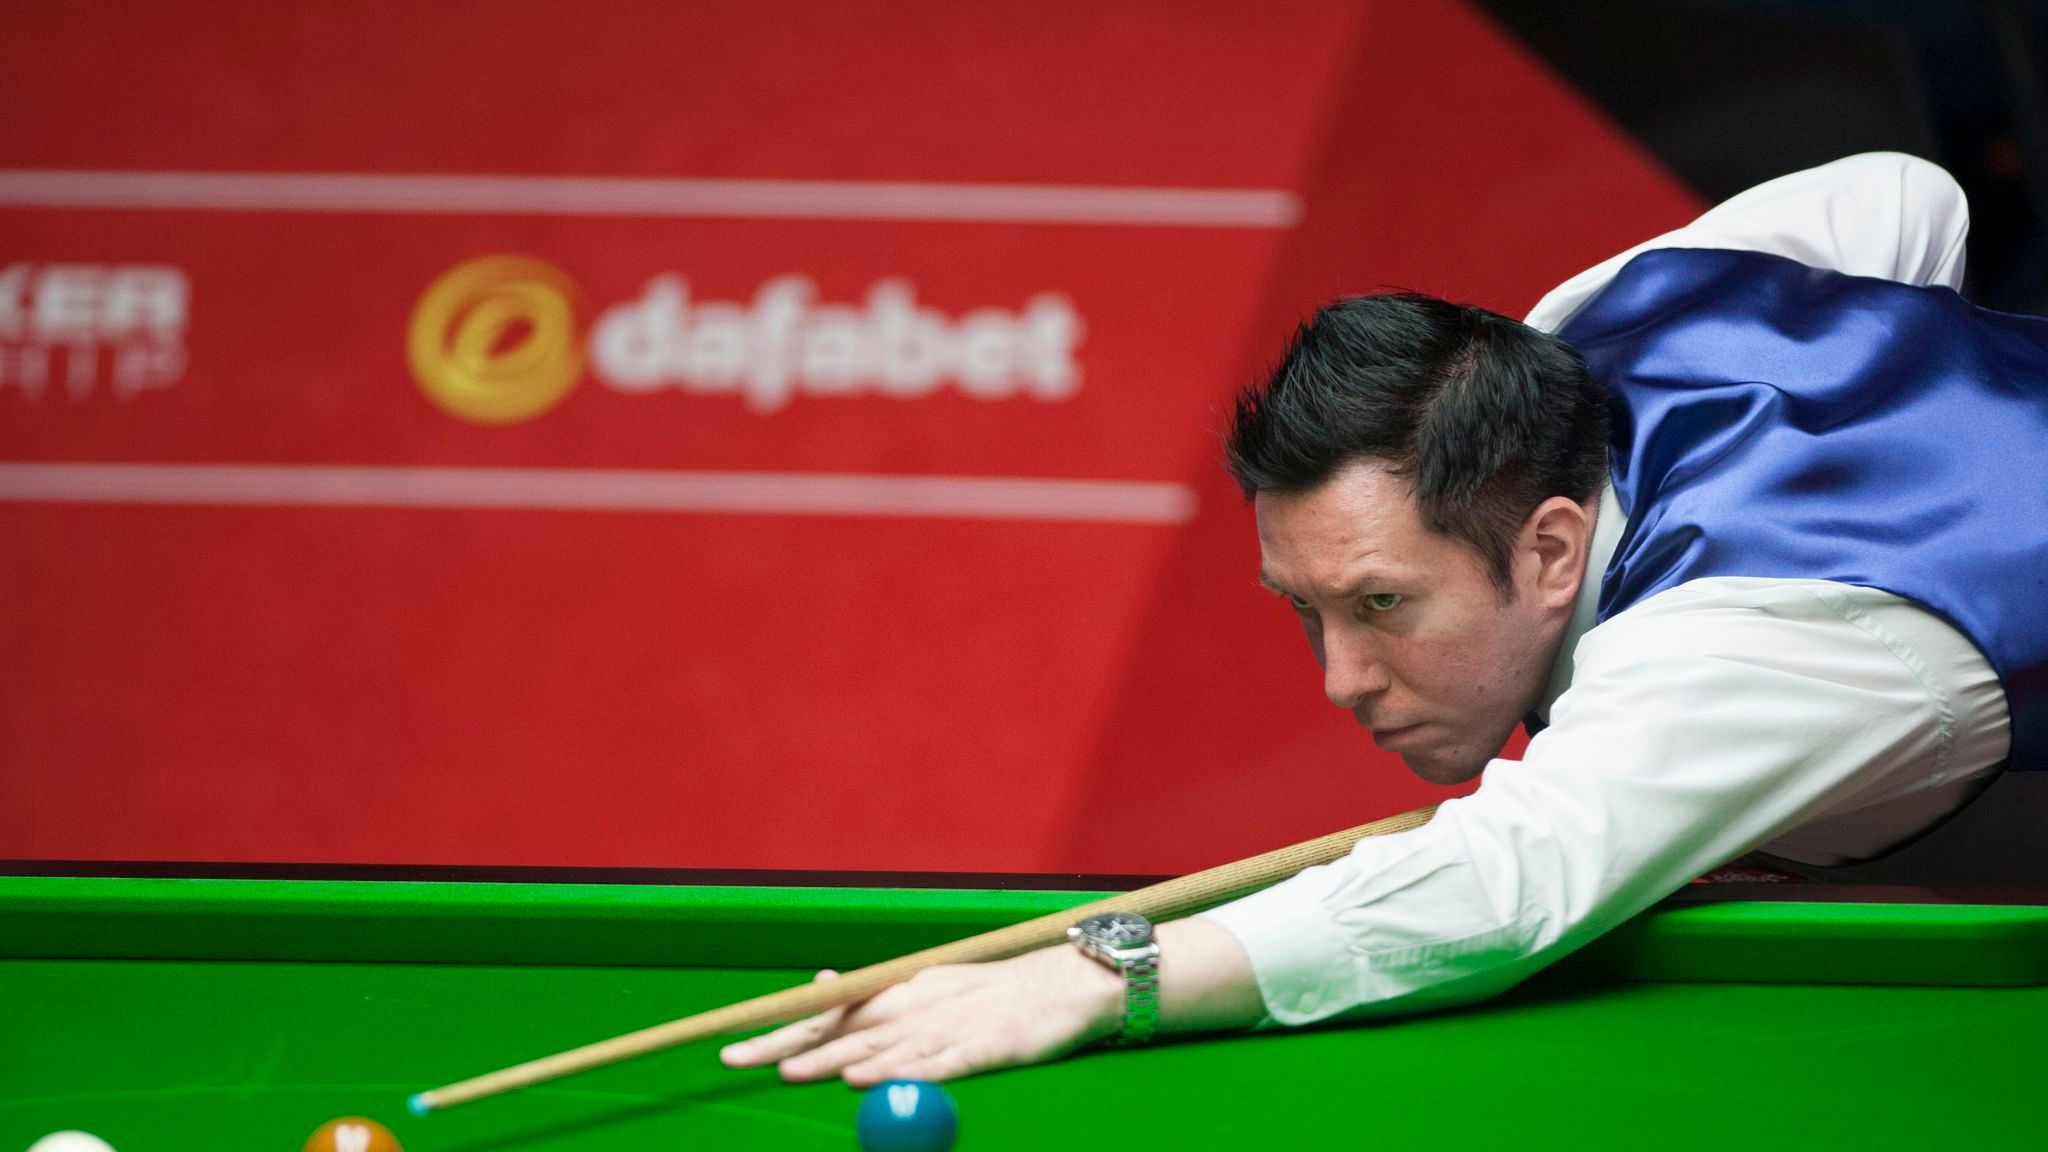 World Championship Dominic Dale and Neil Robertson reach second round at Crucible Snooker News Sky Sports